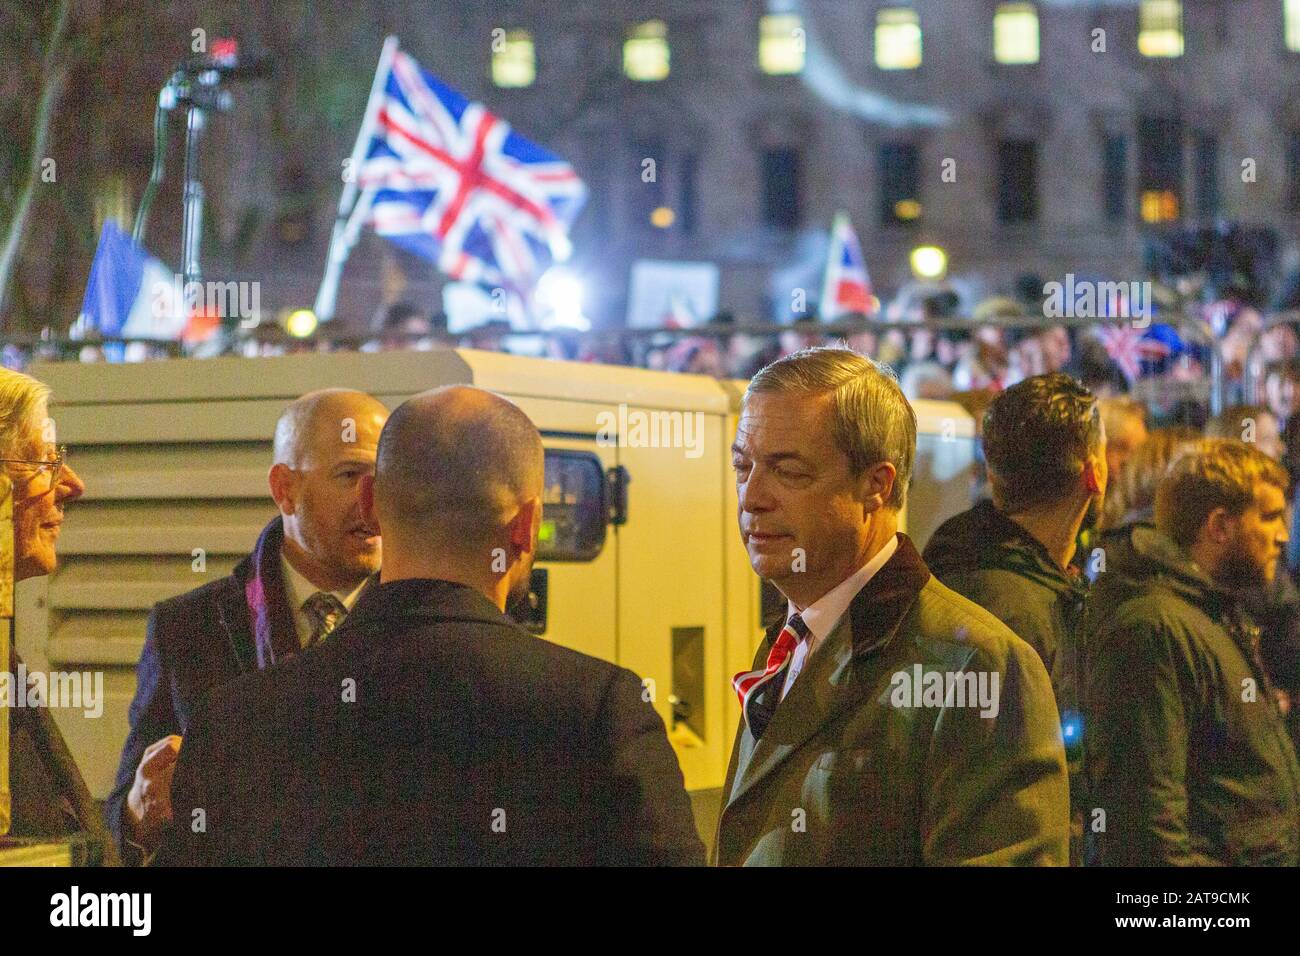 Westminster, London, UK. 31st Jan, 2020. Nigel Farage and Ann Widdecombe backstage before speaking at Parliament Square as Britain prepares to leaves the European Union. Penelope Barritt/Alamy Live News Stock Photo